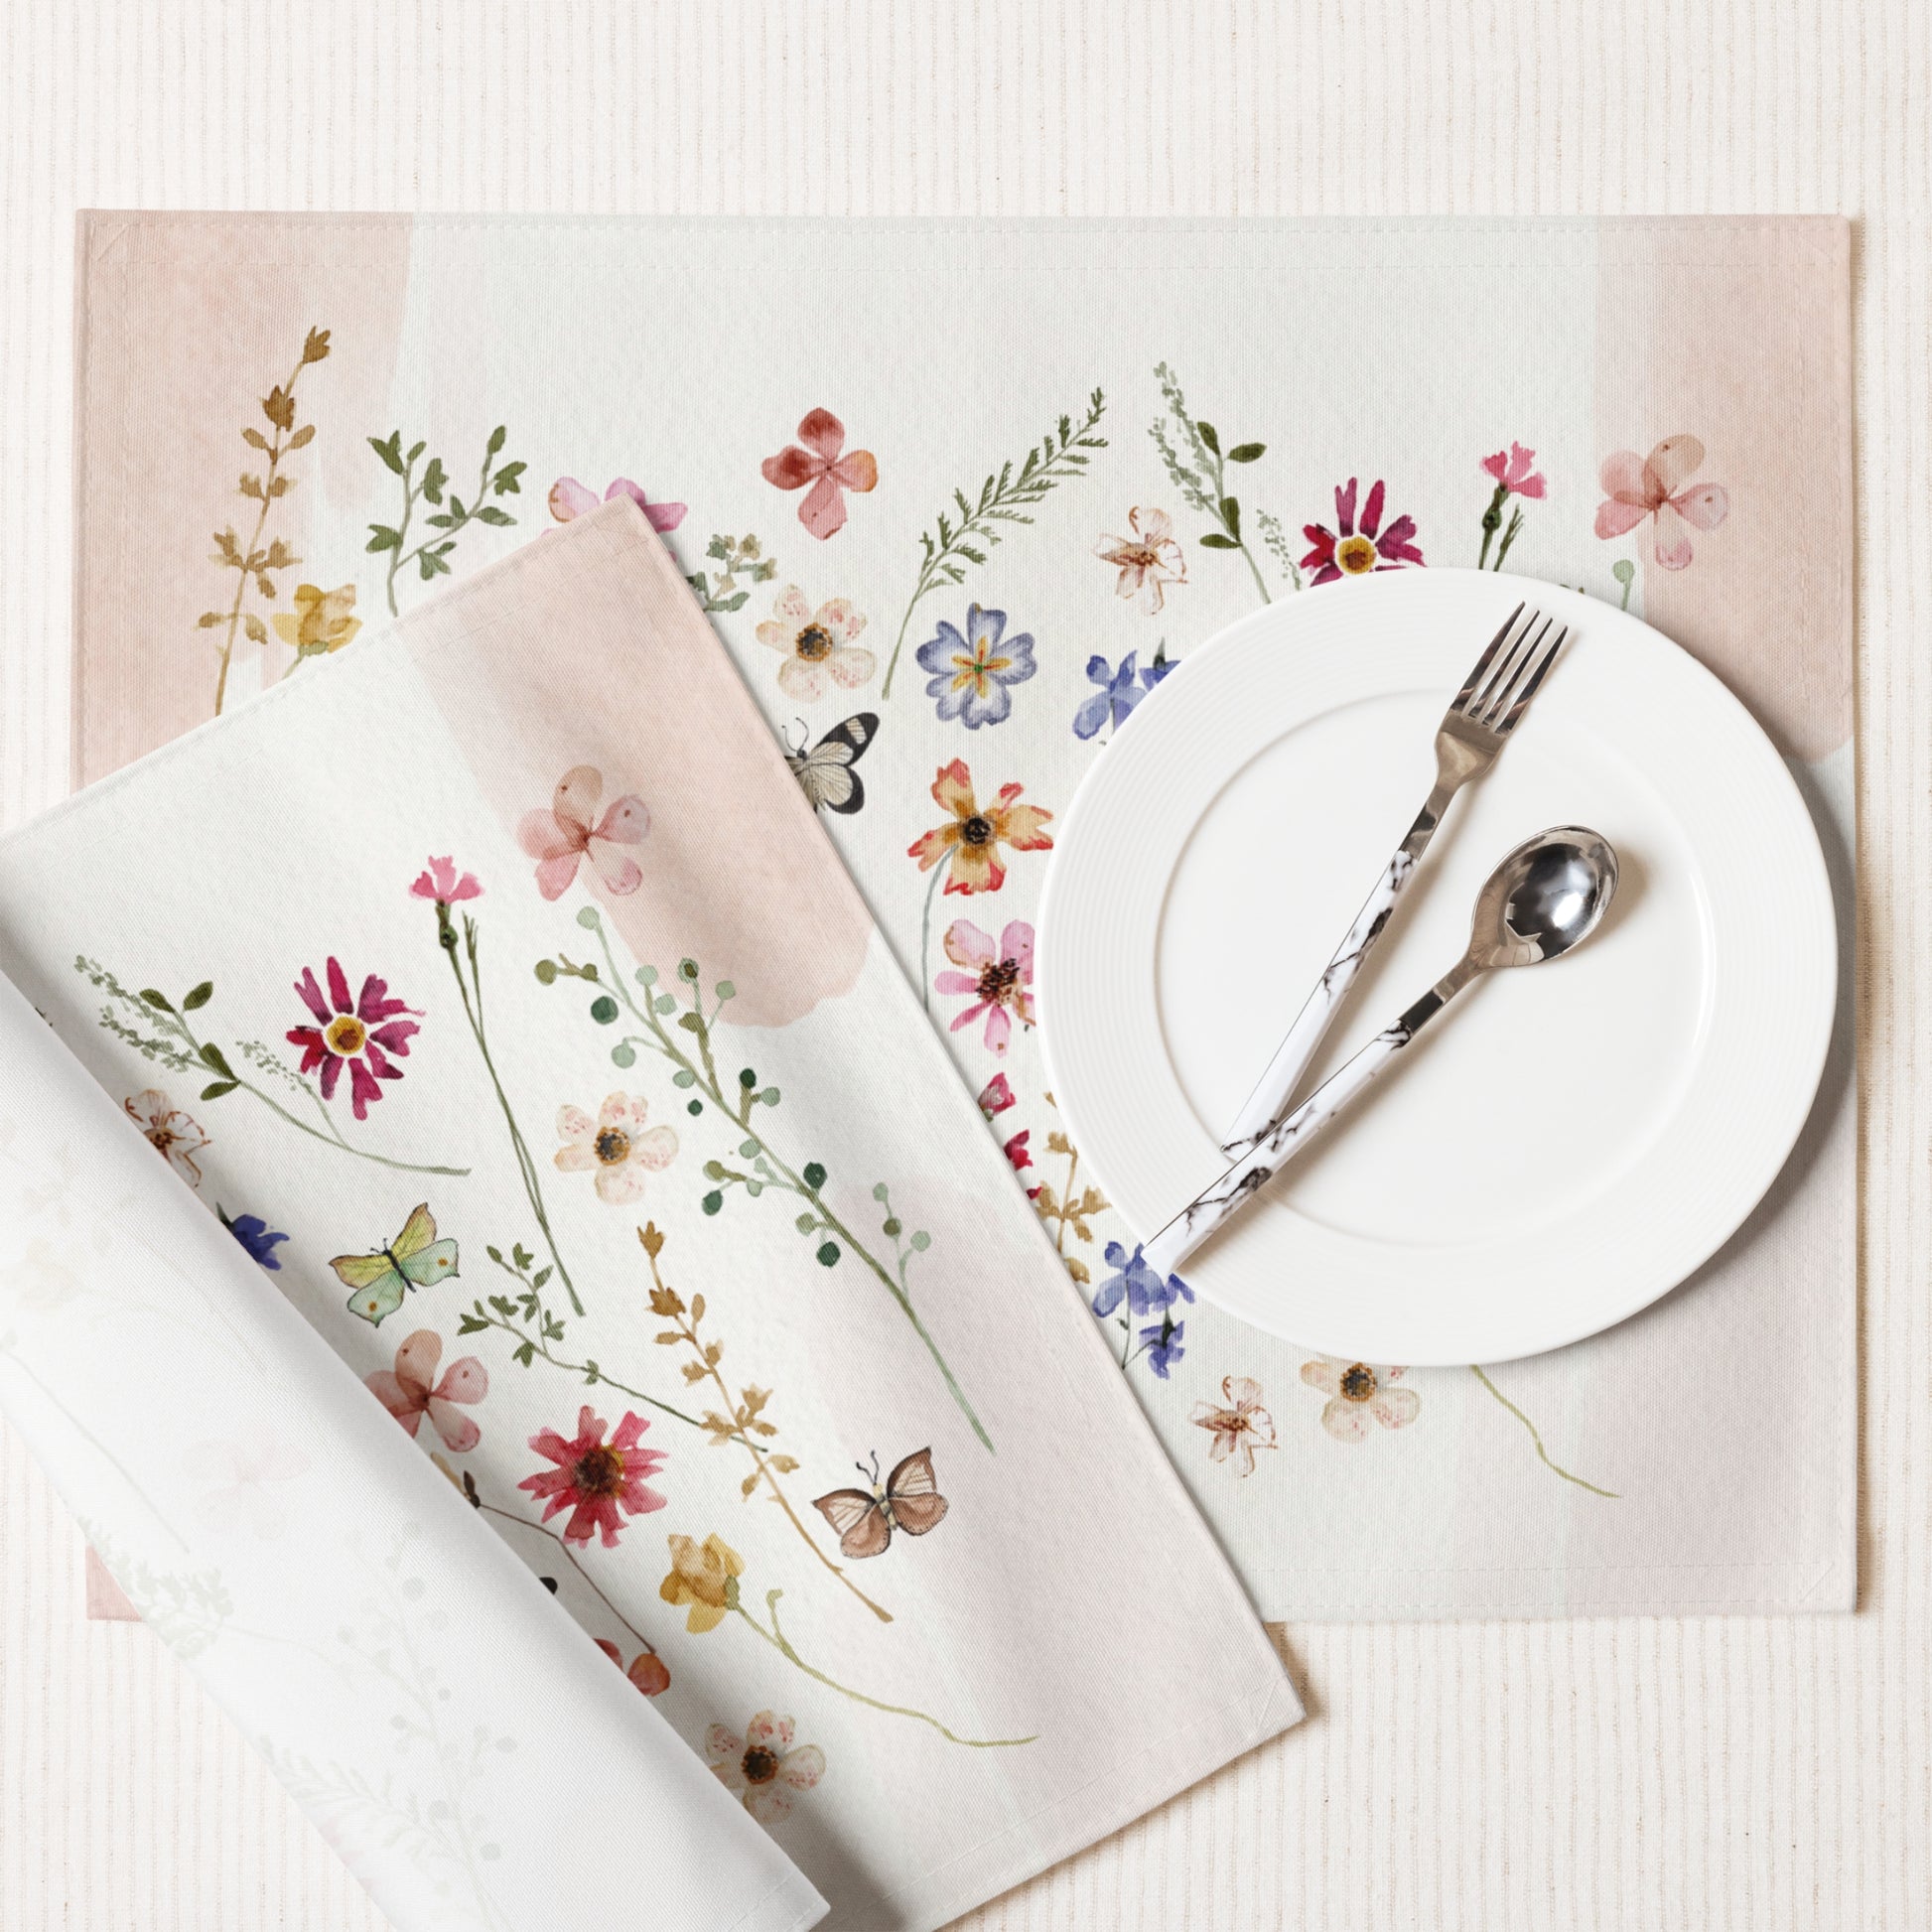 Watercolor pressed & dried Wildflowers Floral PLACEMAT SET